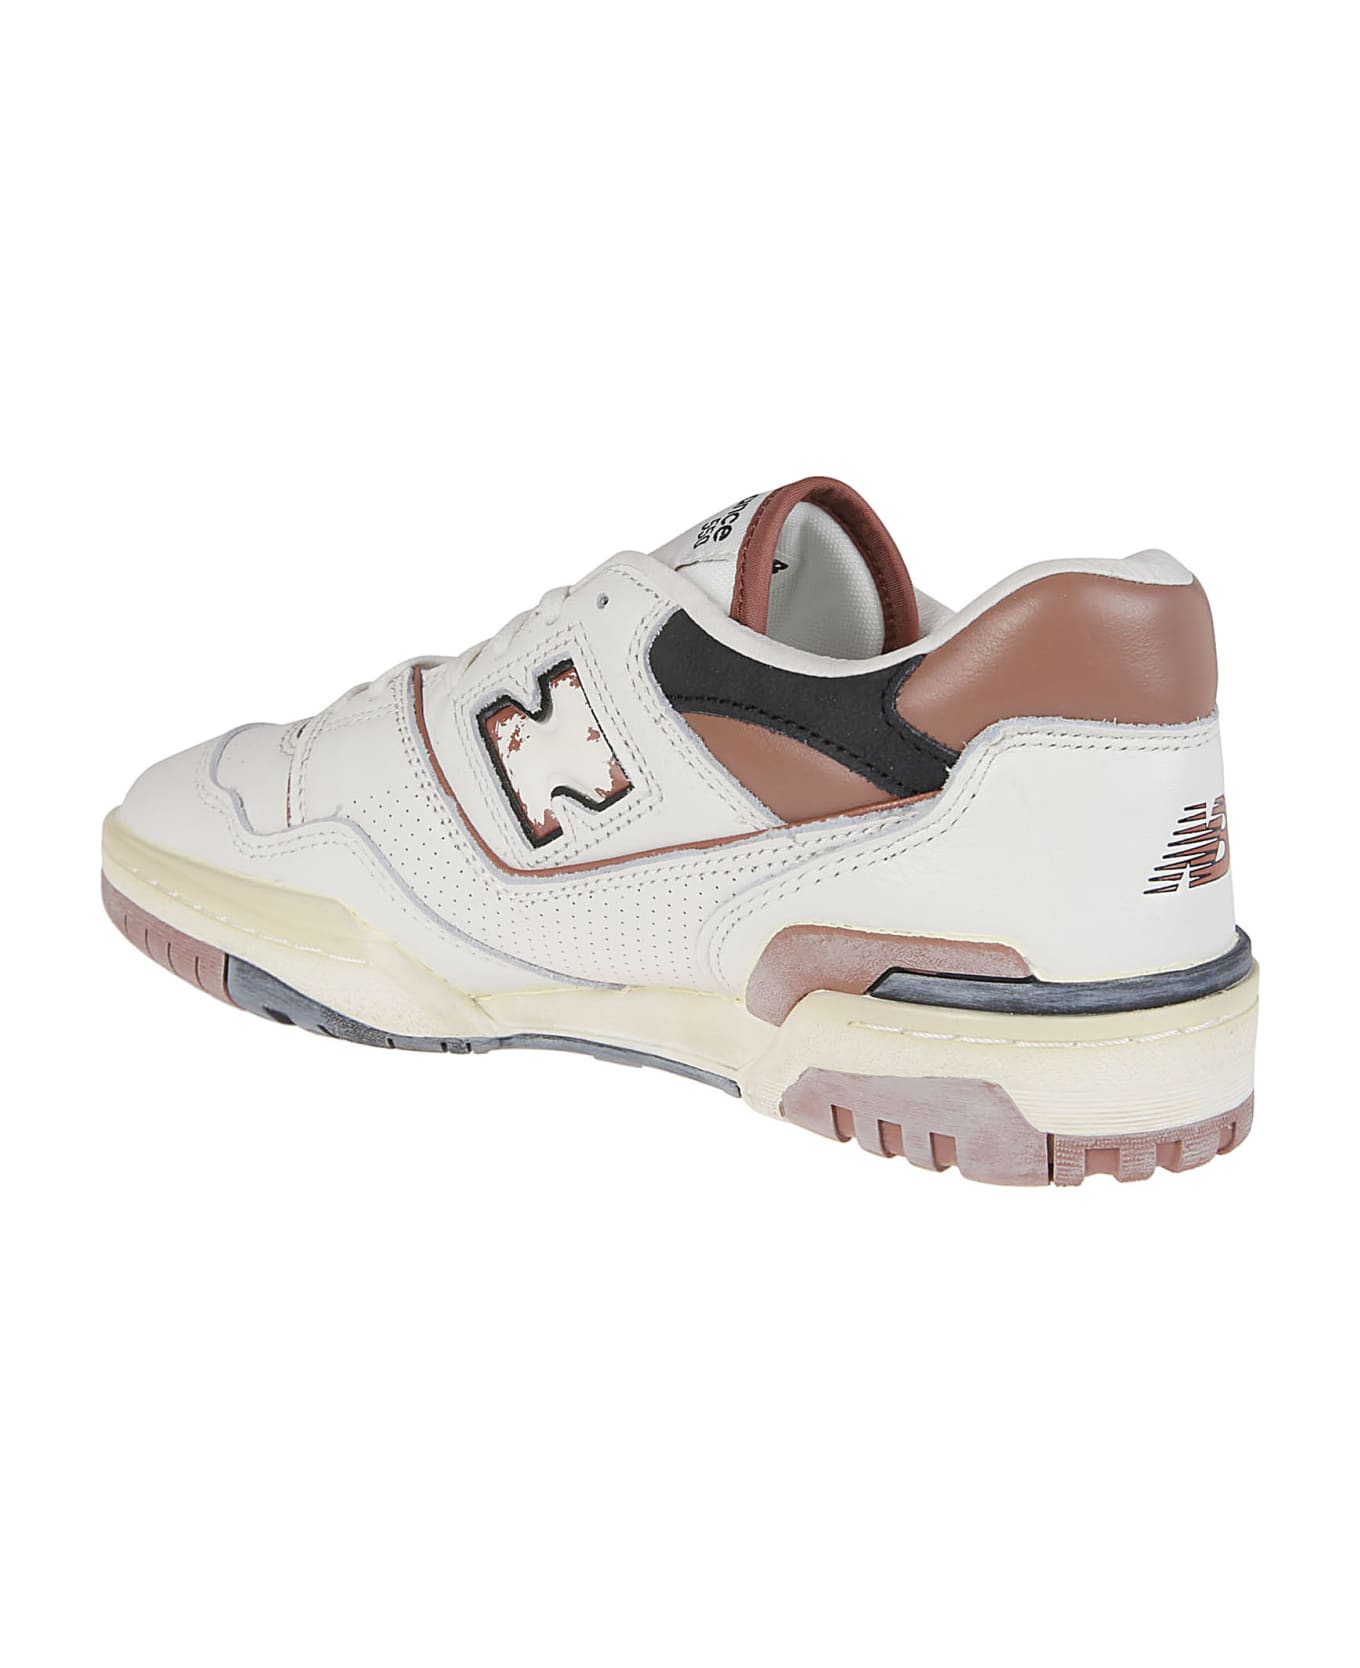 New Balance 550 Sneakers - Off White/brown